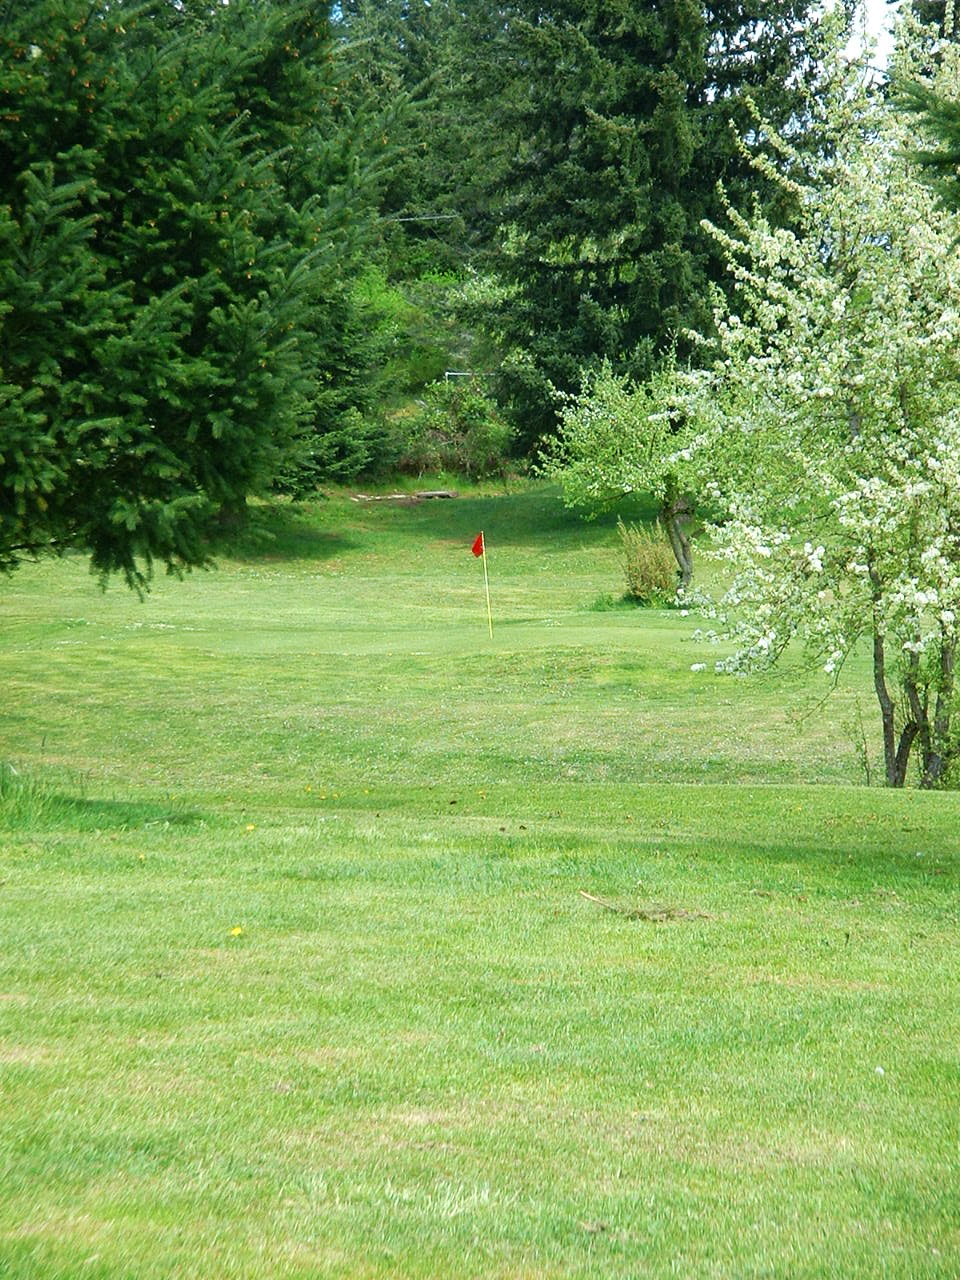 Eaglequest Golf Center | point of interest | 1601 Thatcher Rd, Nanaimo, BC V9R 1S6, Canada | 2507541325 OR +1 250-754-1325